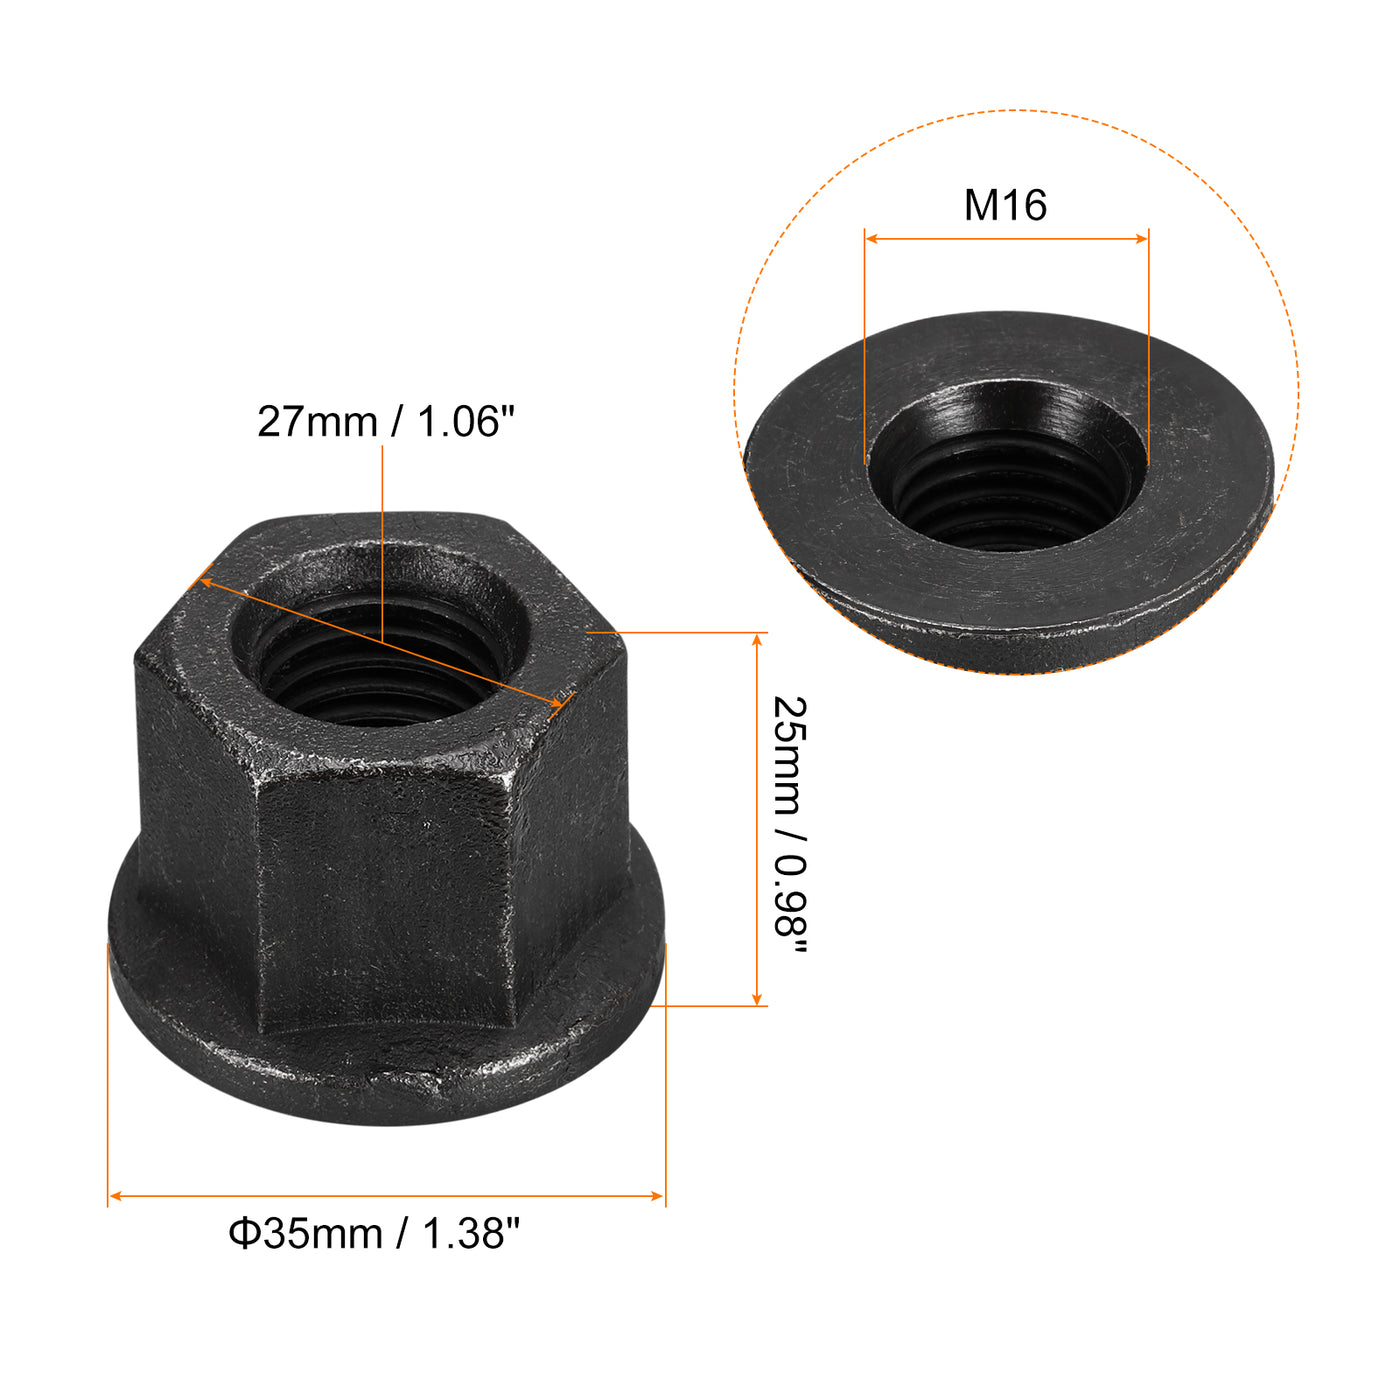 uxcell Uxcell M16 Flange Hex Lock Nuts, 5pcs Grade 8.8 Carbon Steel Hex Flange Nuts